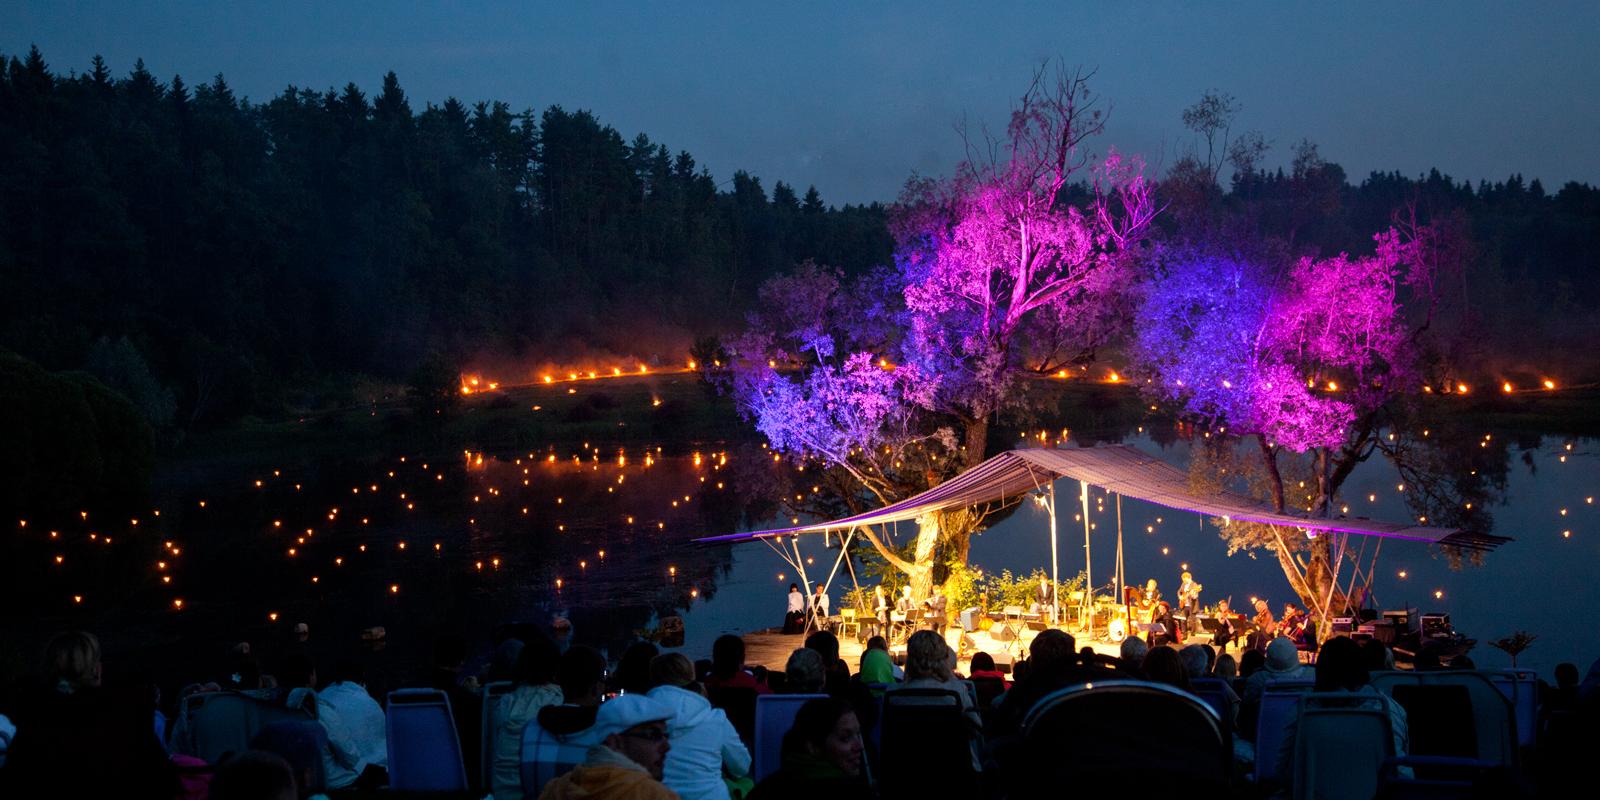 The Leigo Lake Music Festival is a perfect example of how to bring together nature and music to create unique and truly memorable experiences. Concert